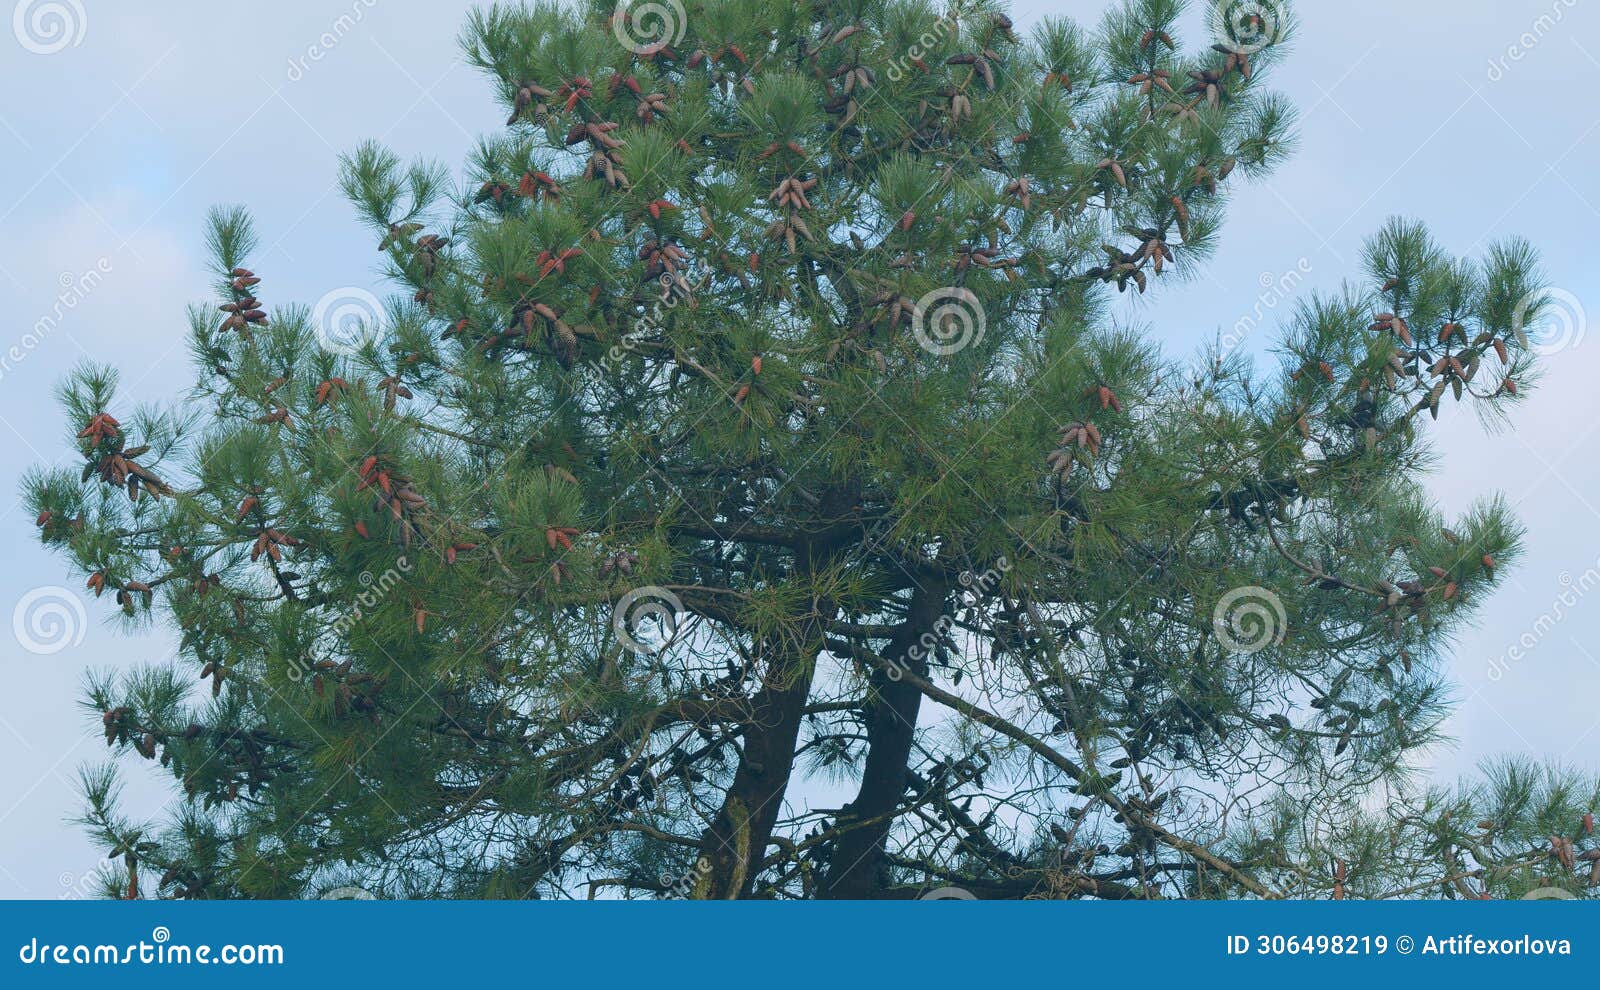 pinaceae family. pinus. pine branches swaying in the wind. static.